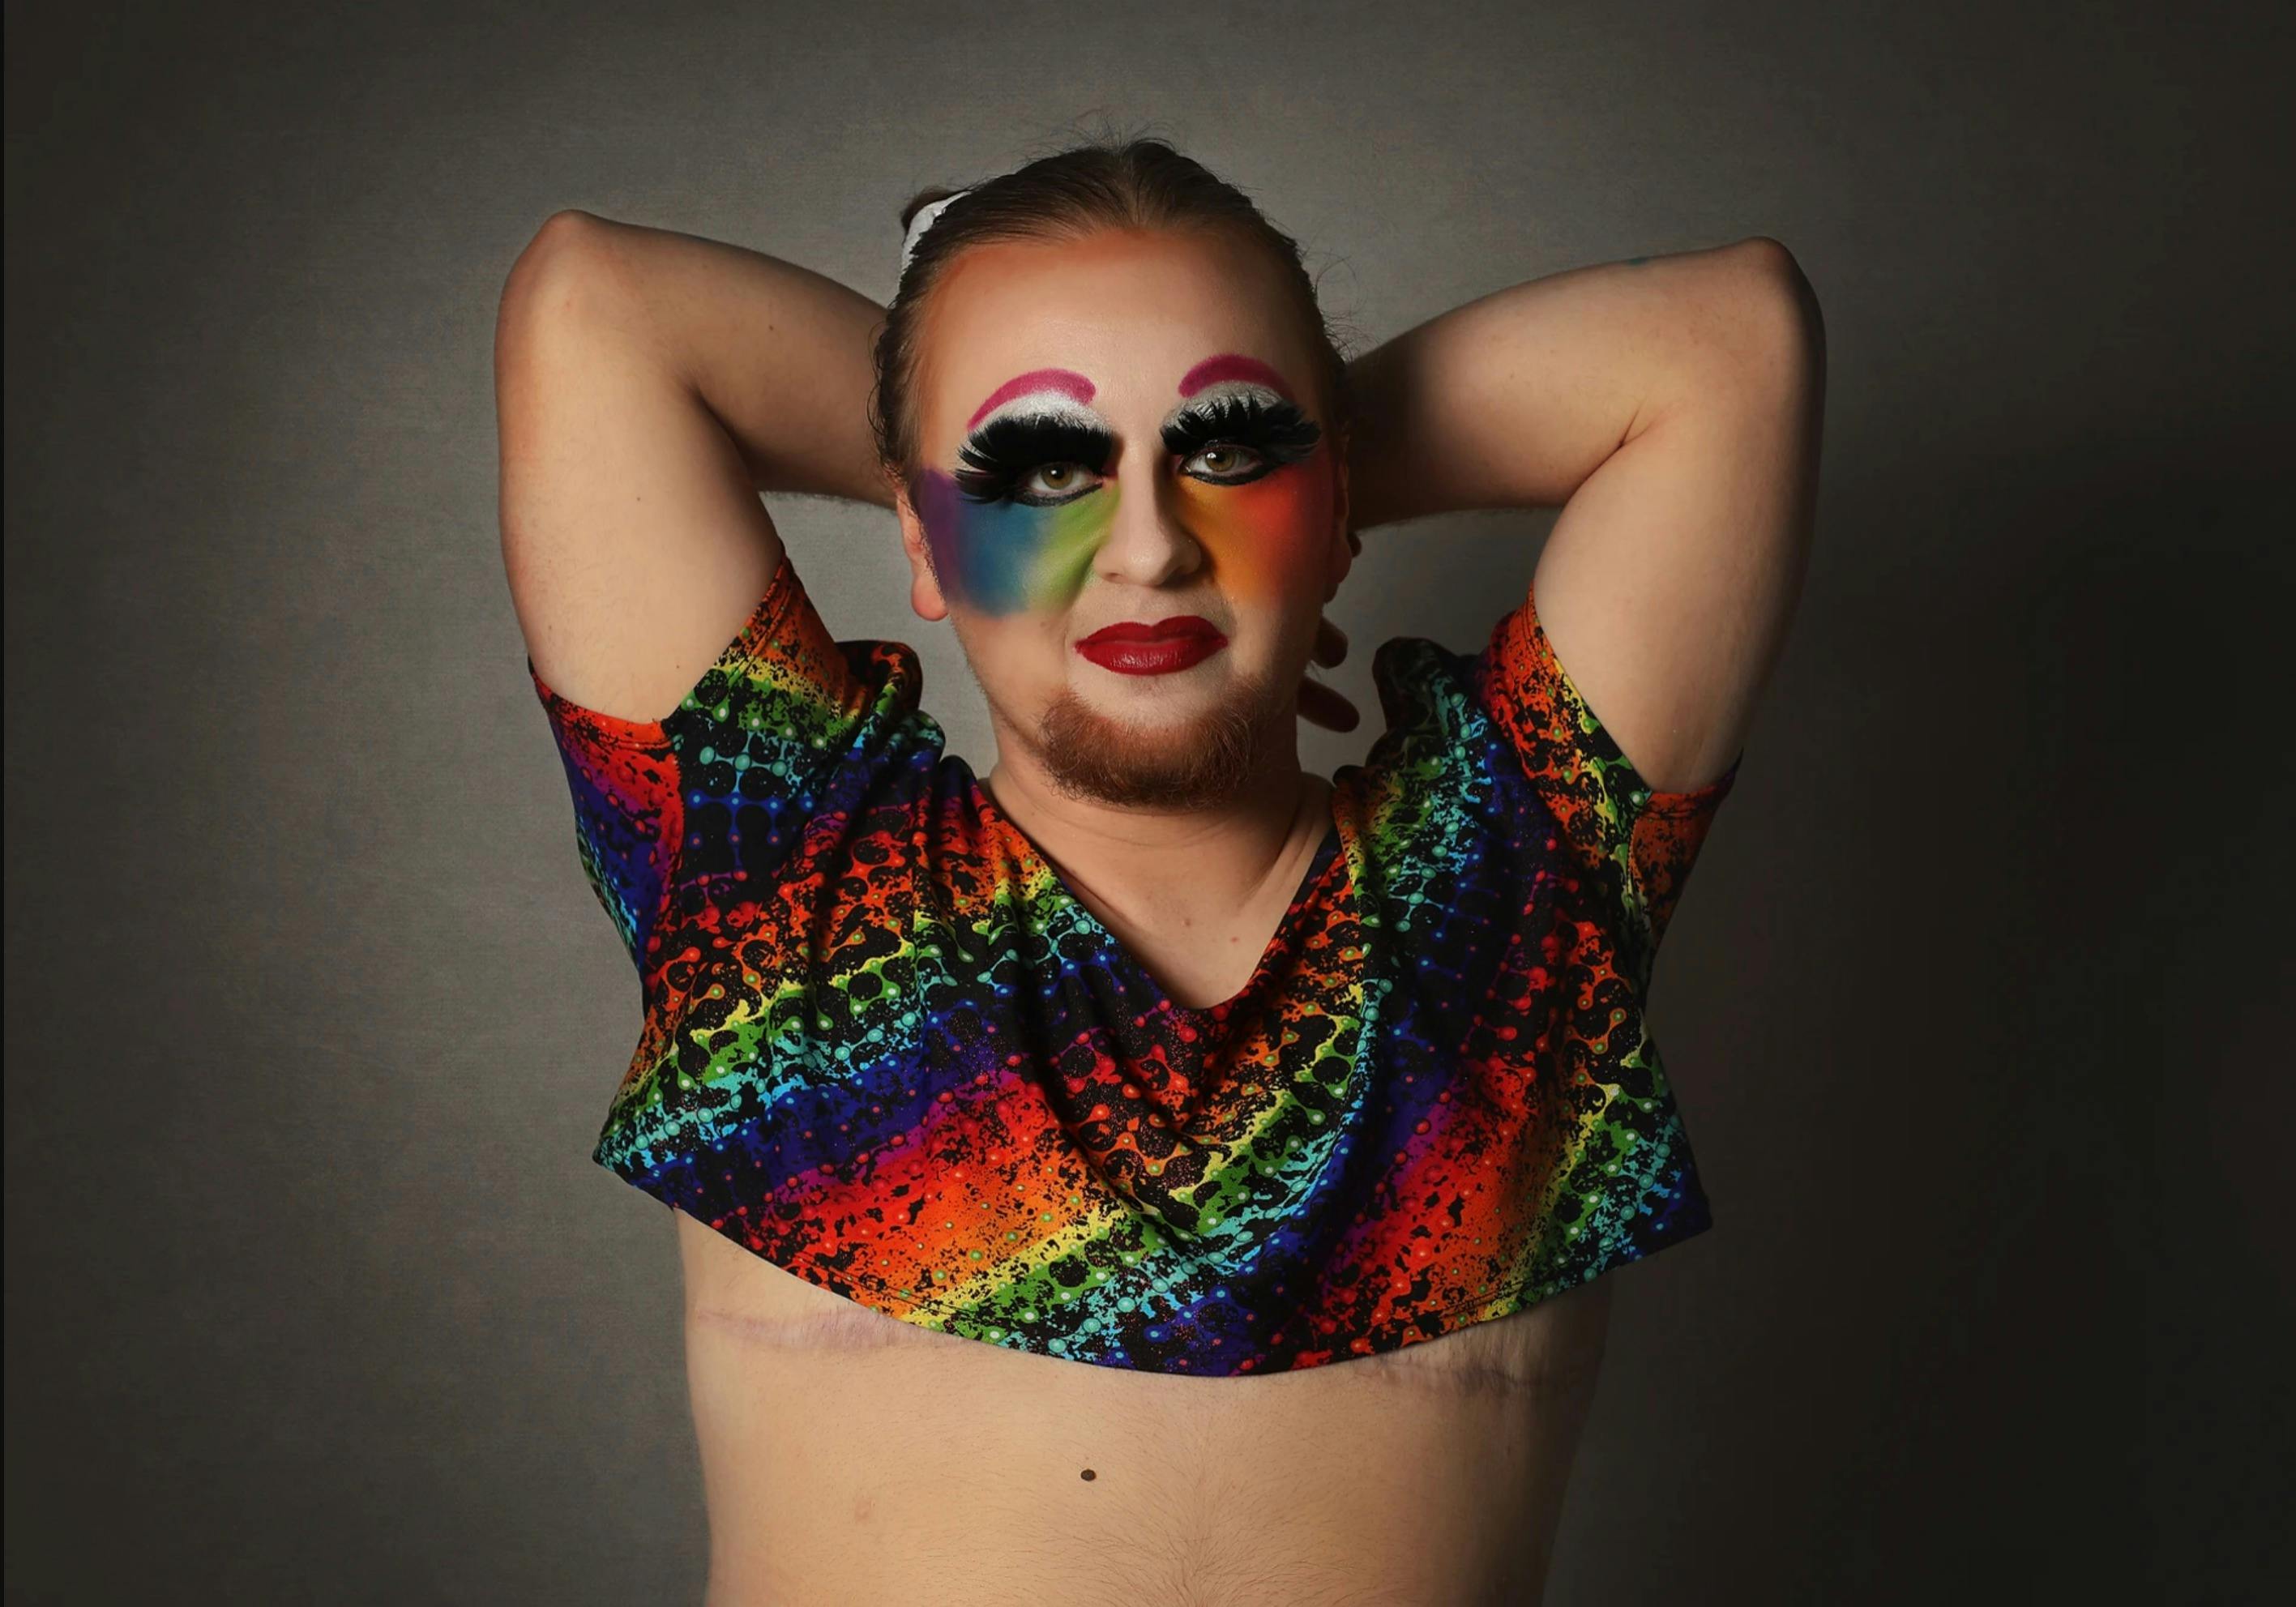 Coco LaQueer looks at the camera with full lashes and pink eyebrows, wearing rainbow face makeup and a colourful rainbow crop top.